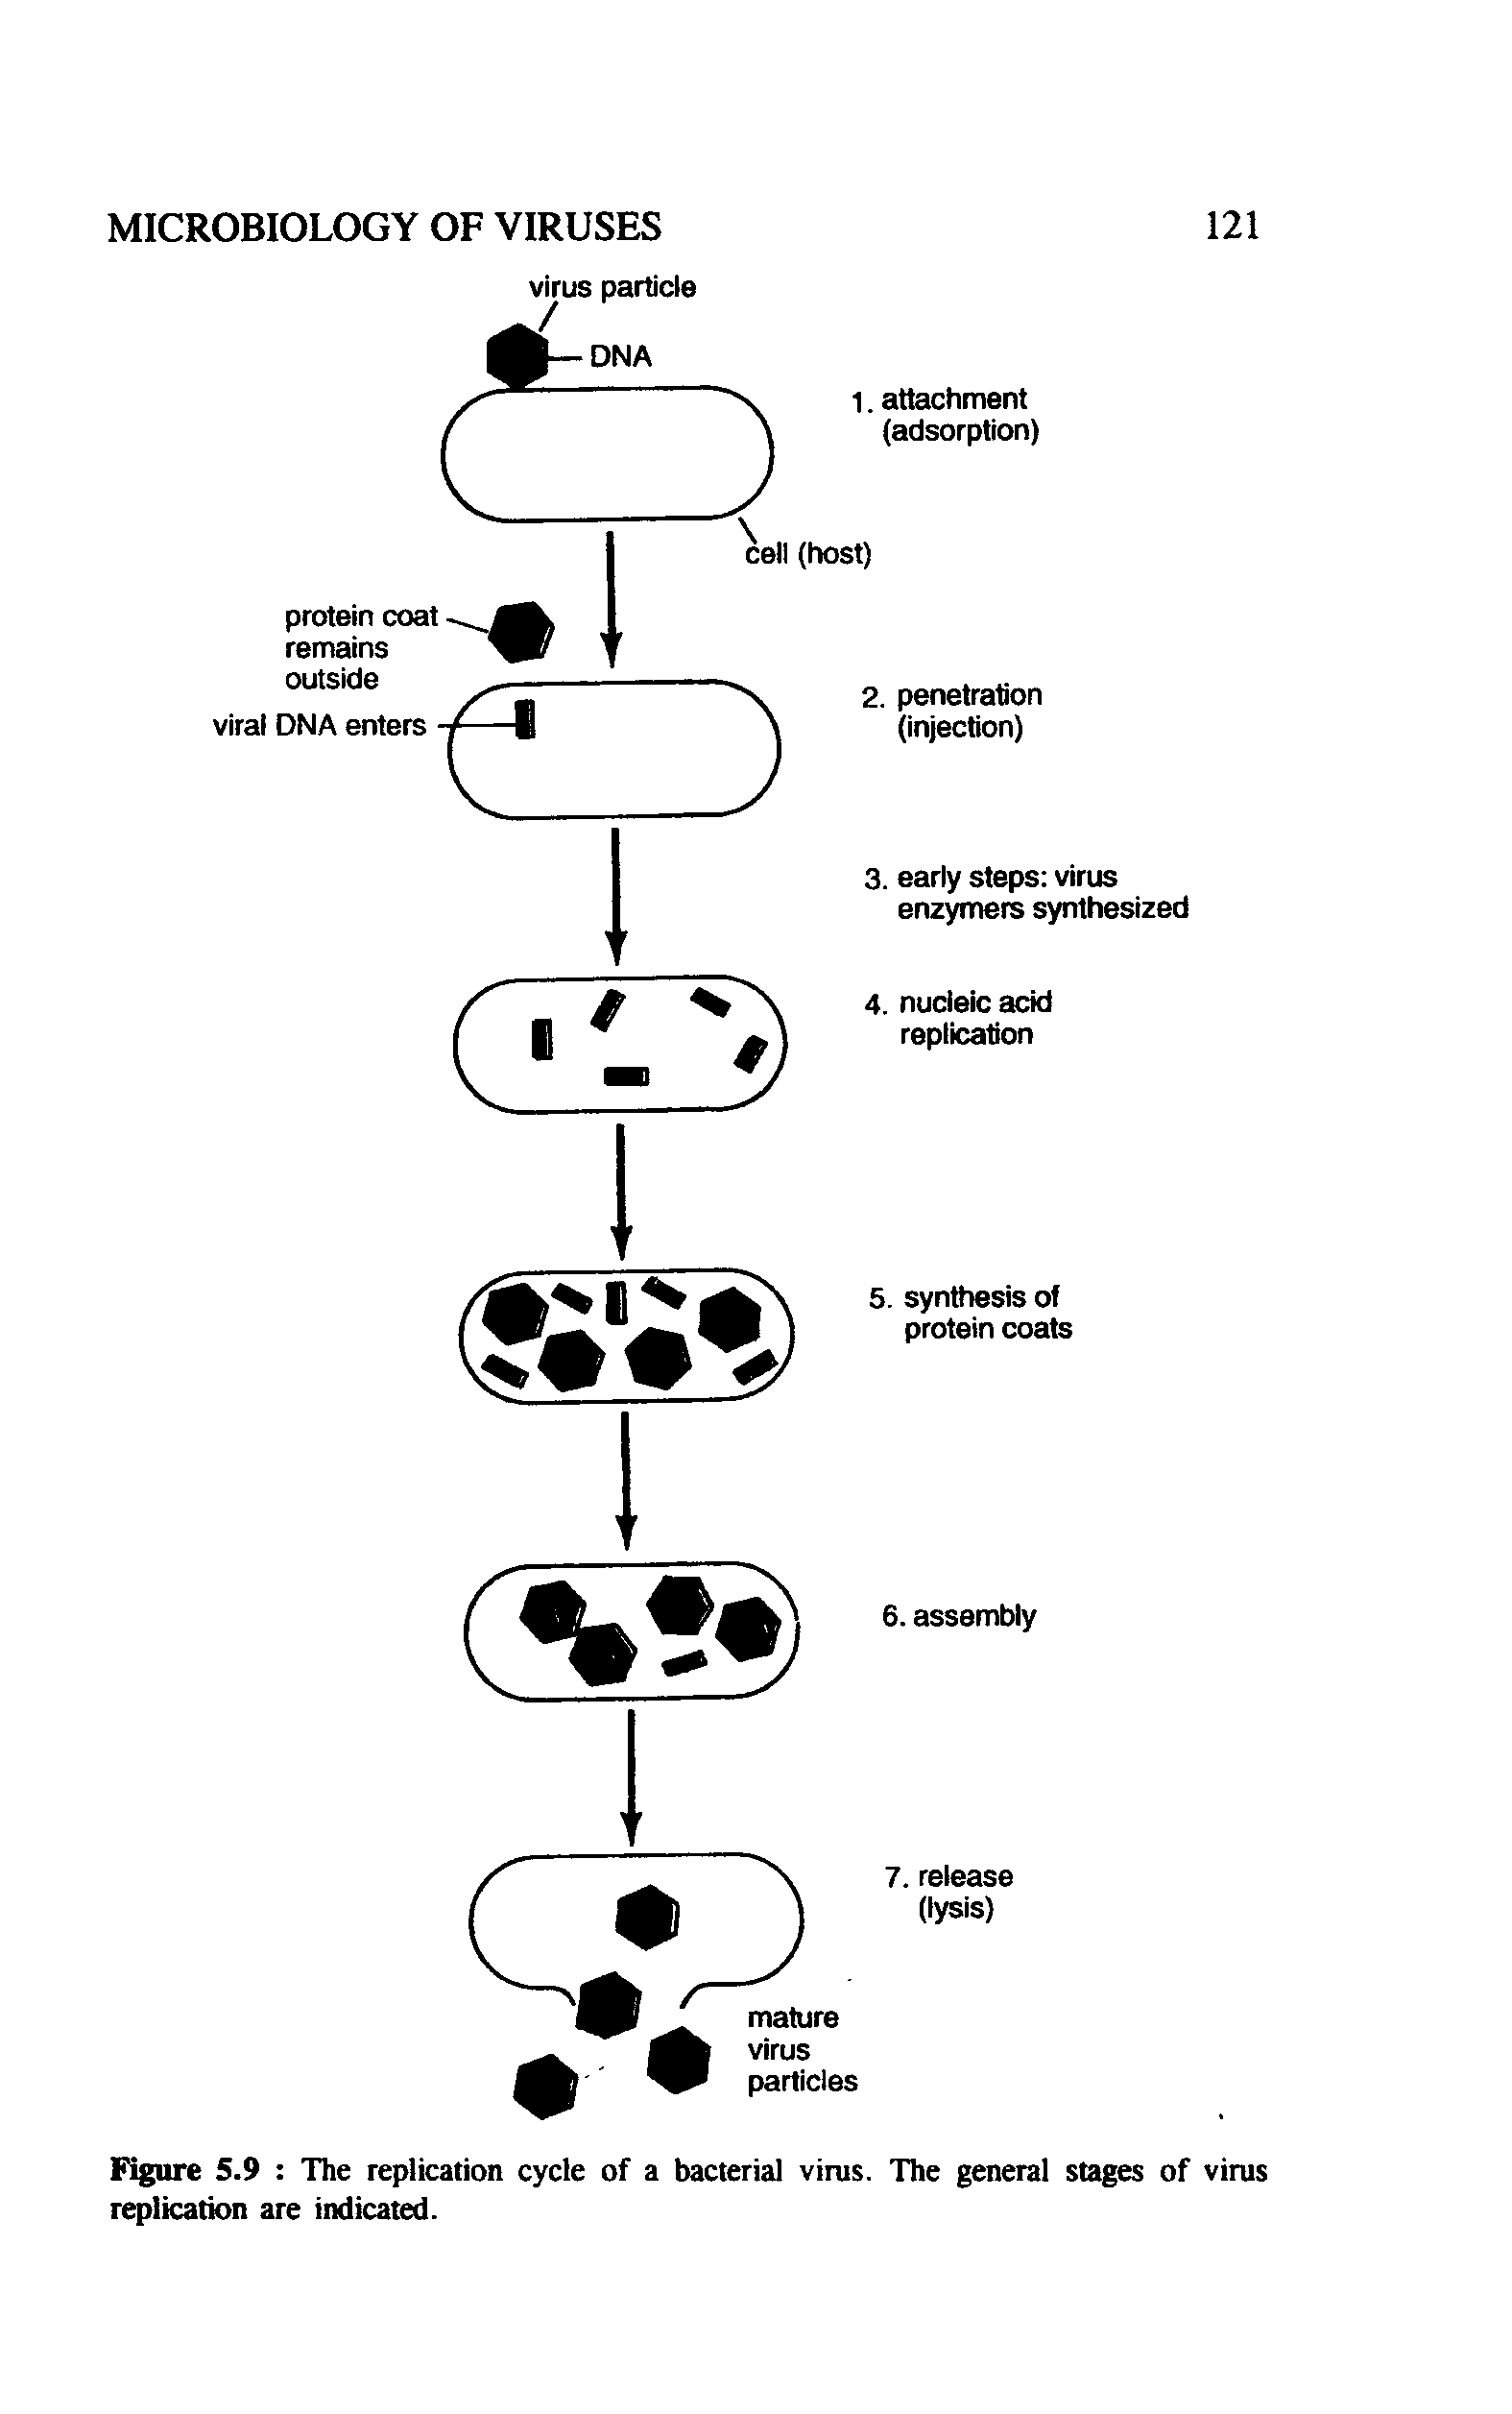 Figure 5.9 The replication cycle of a bacterial virus. The general stages of virus replication are indicated.